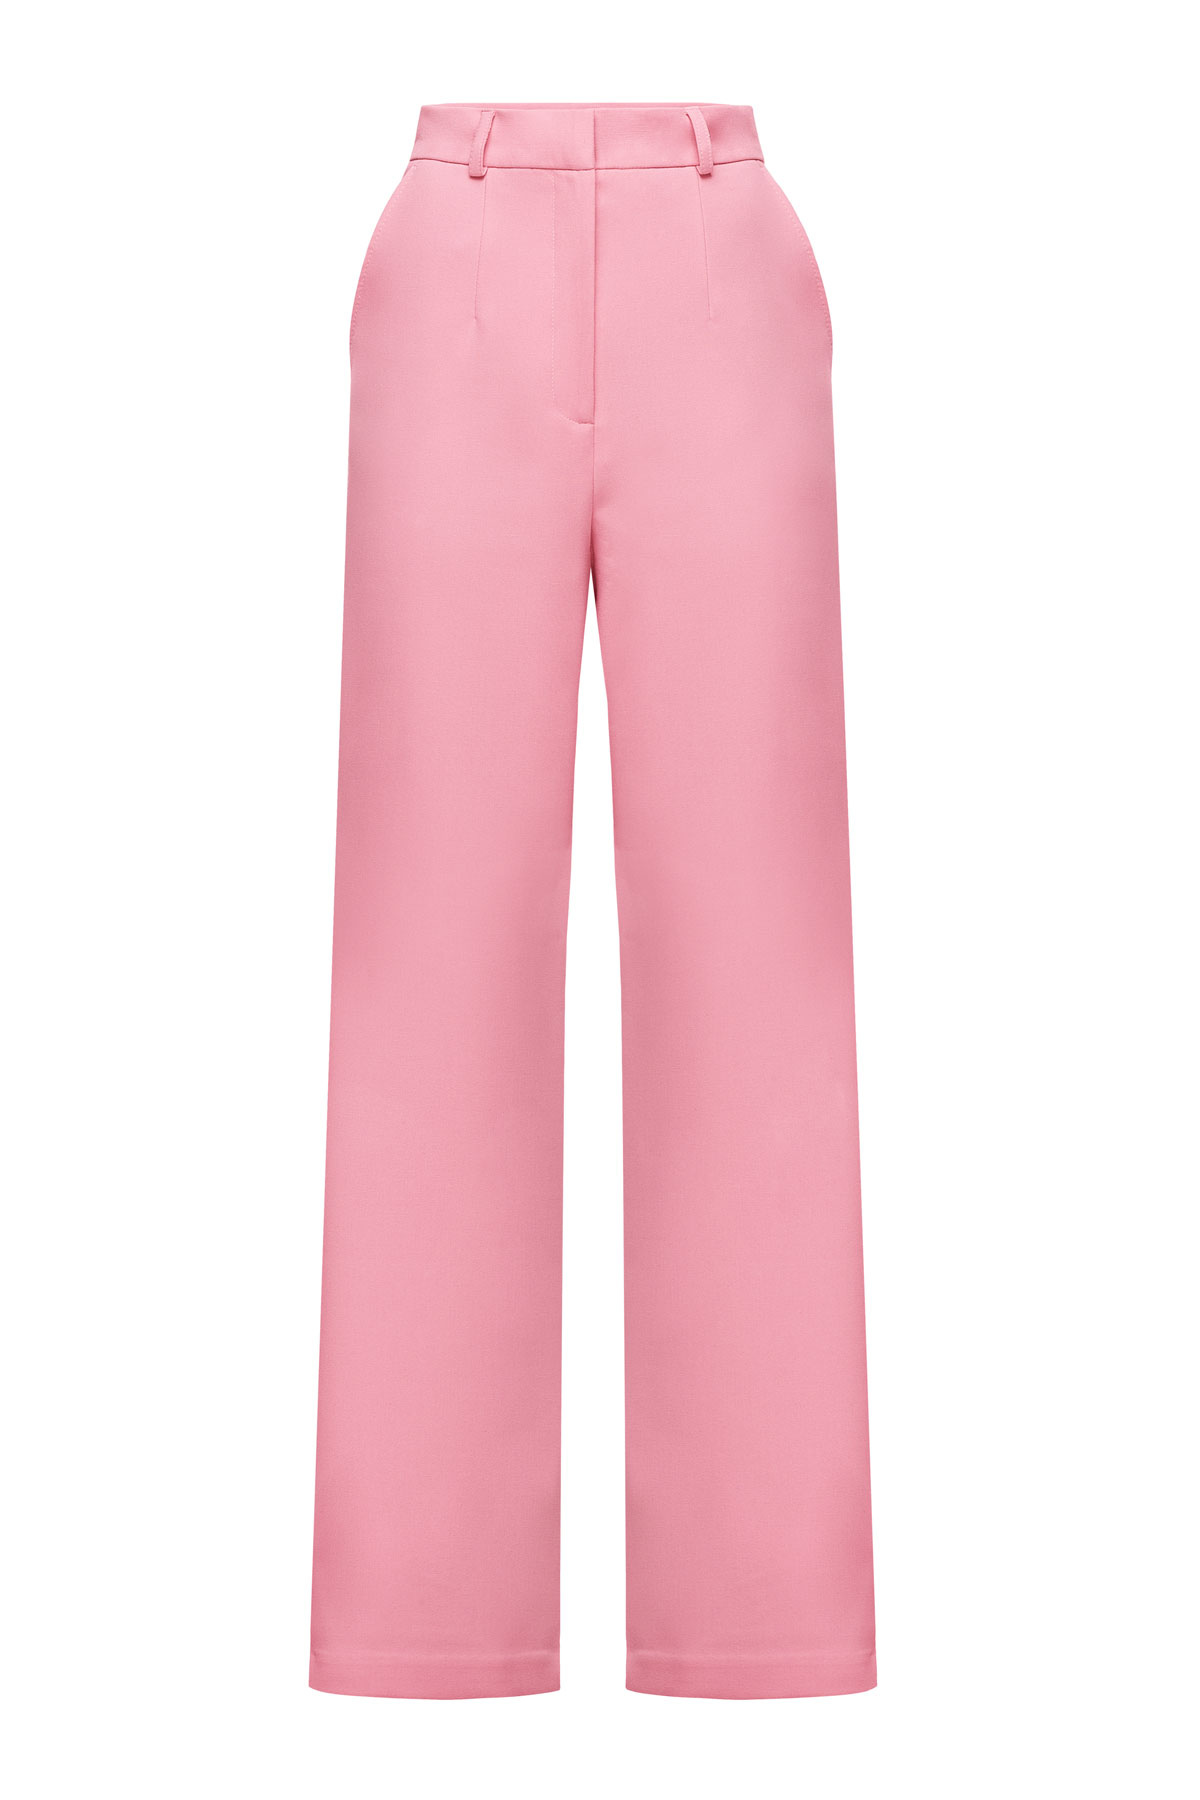 Wide leg pink trousers , photo 7